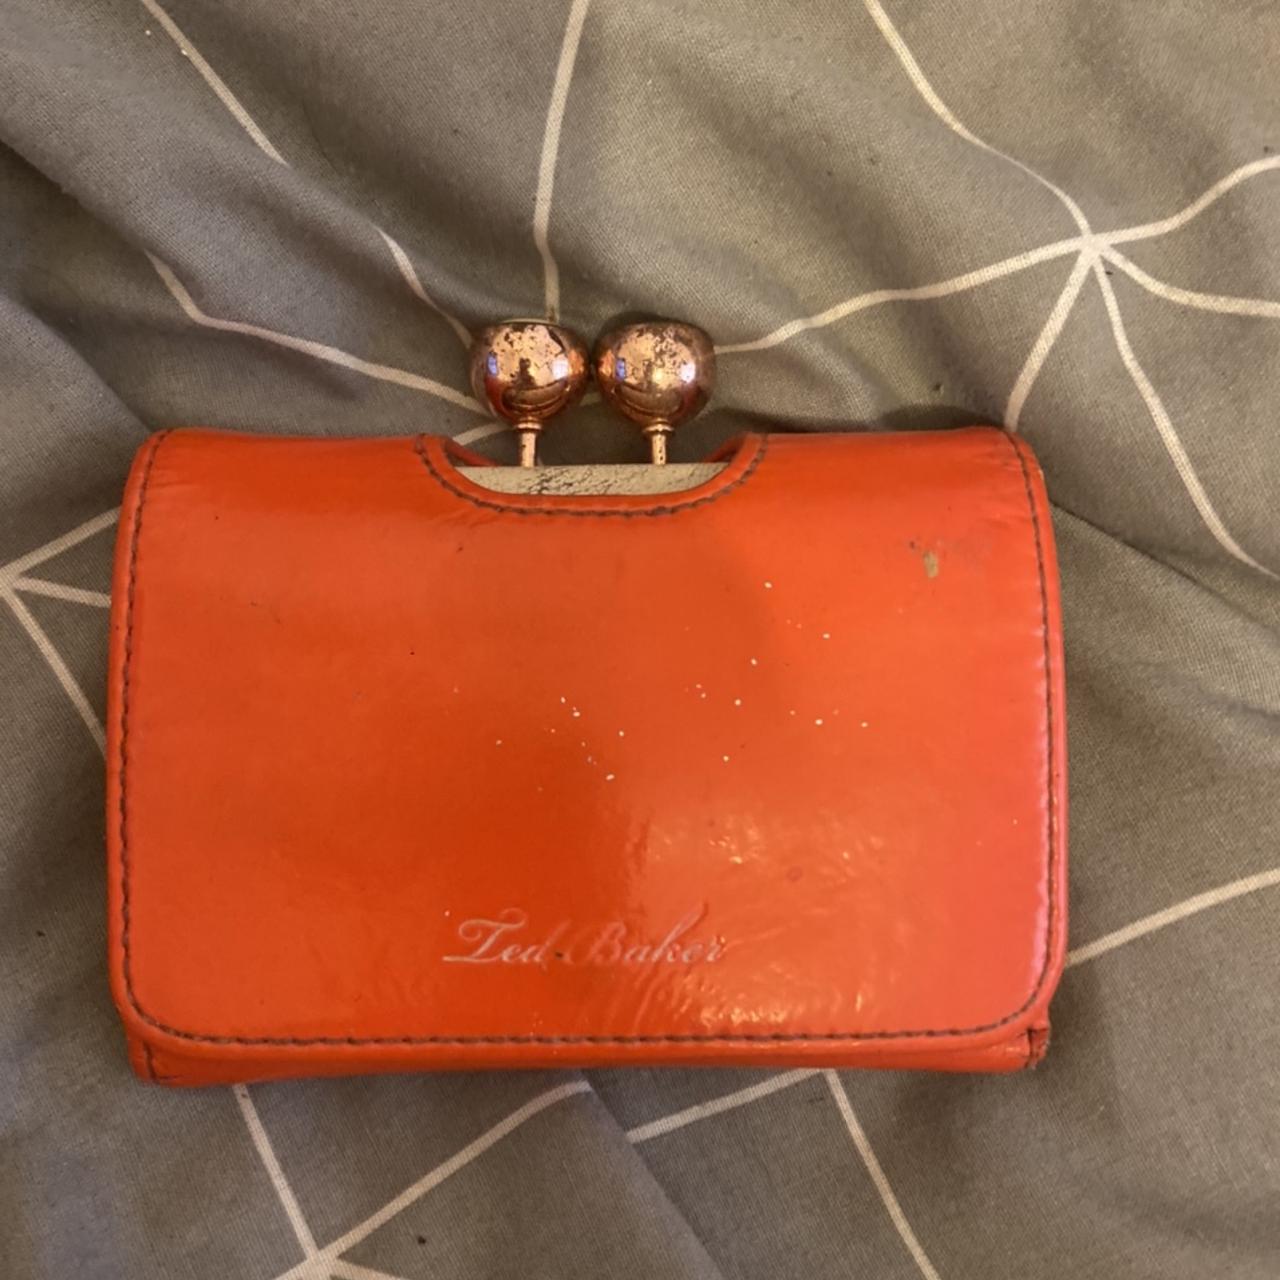 I got a Ted Baker bag for 50p in the charity shop - it was mangled & dirty  but I got it back to near perfect, here's how | The US Sun